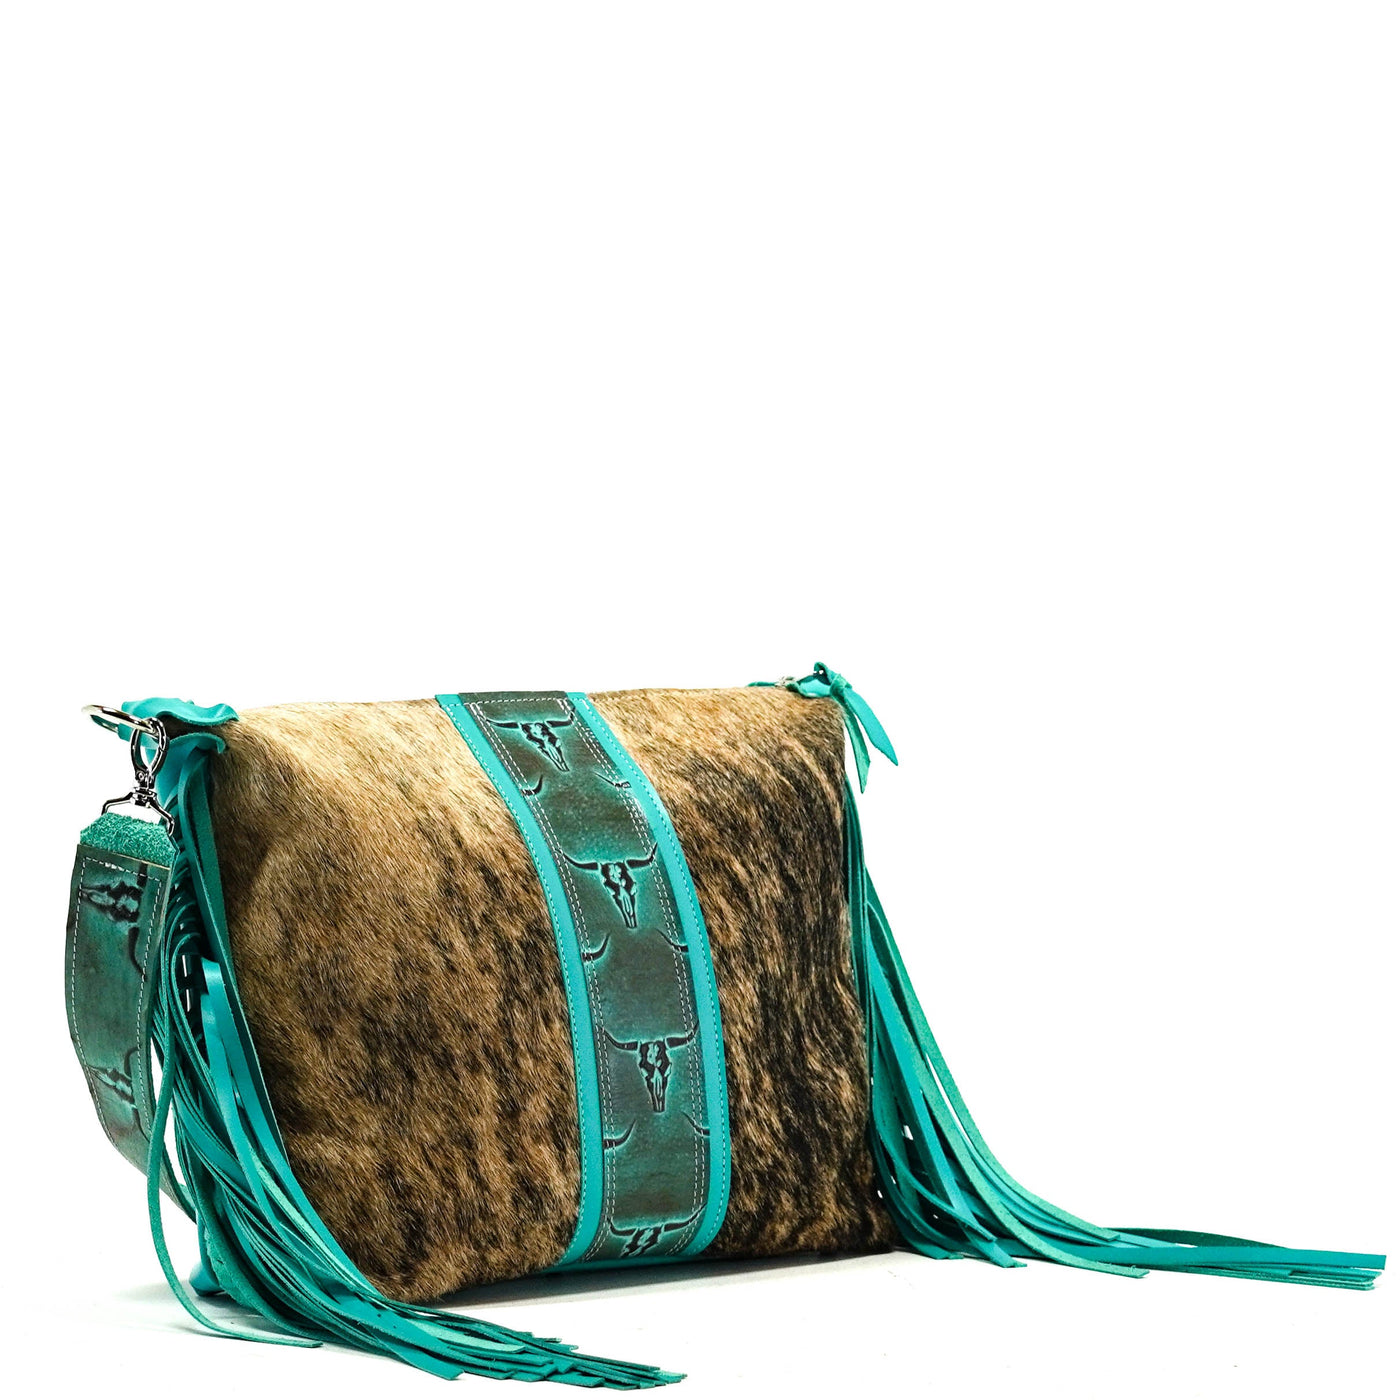 Oakley - Two-Tone Brindle w/ Royston Skulls-Oakley-Western-Cowhide-Bags-Handmade-Products-Gifts-Dancing Cactus Designs